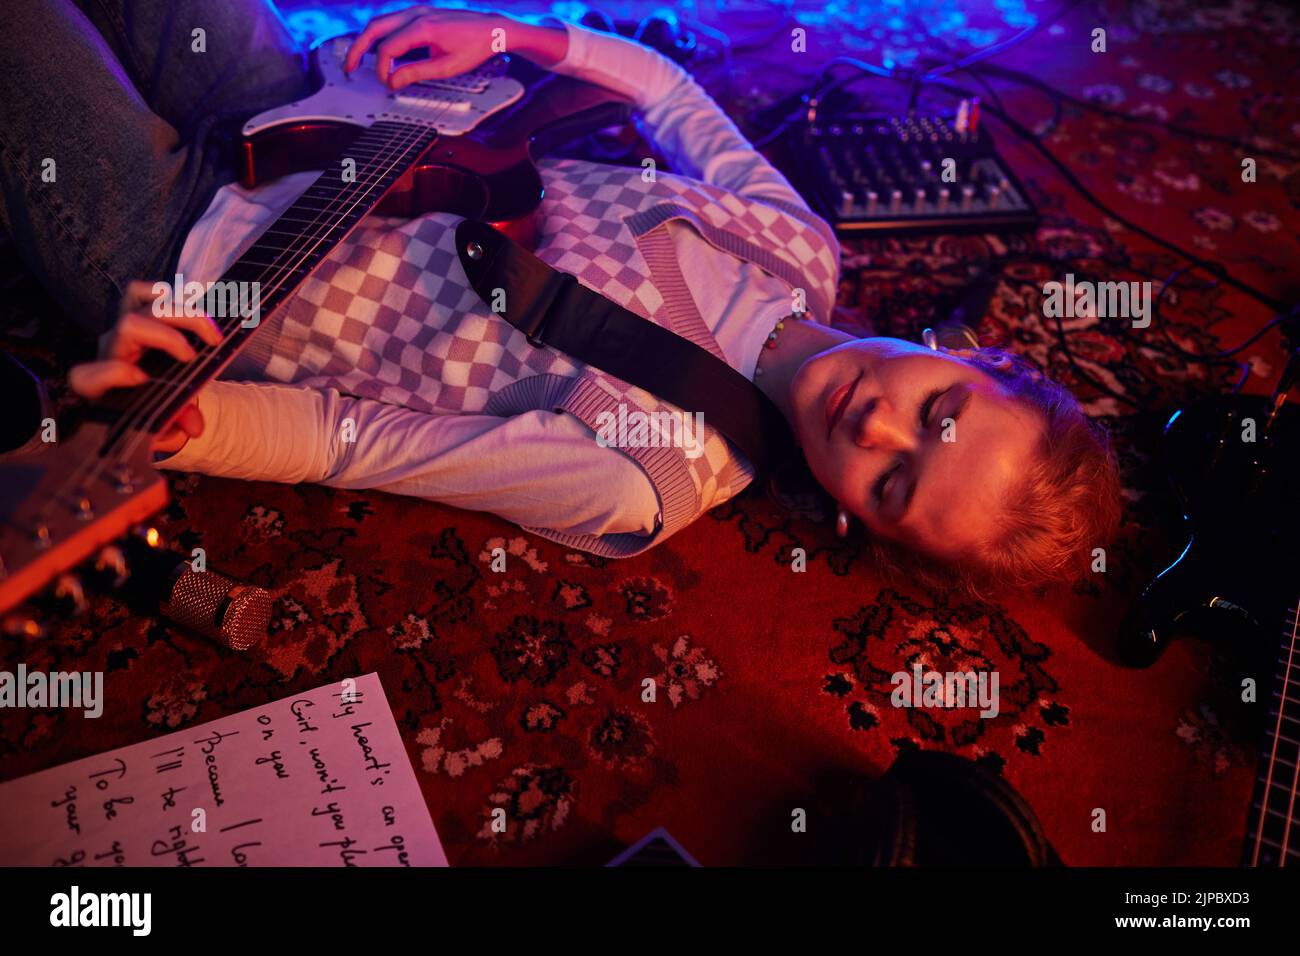 Closeup of young woman playing guitar while lying on carpet lit by dim red lights Stock Photo